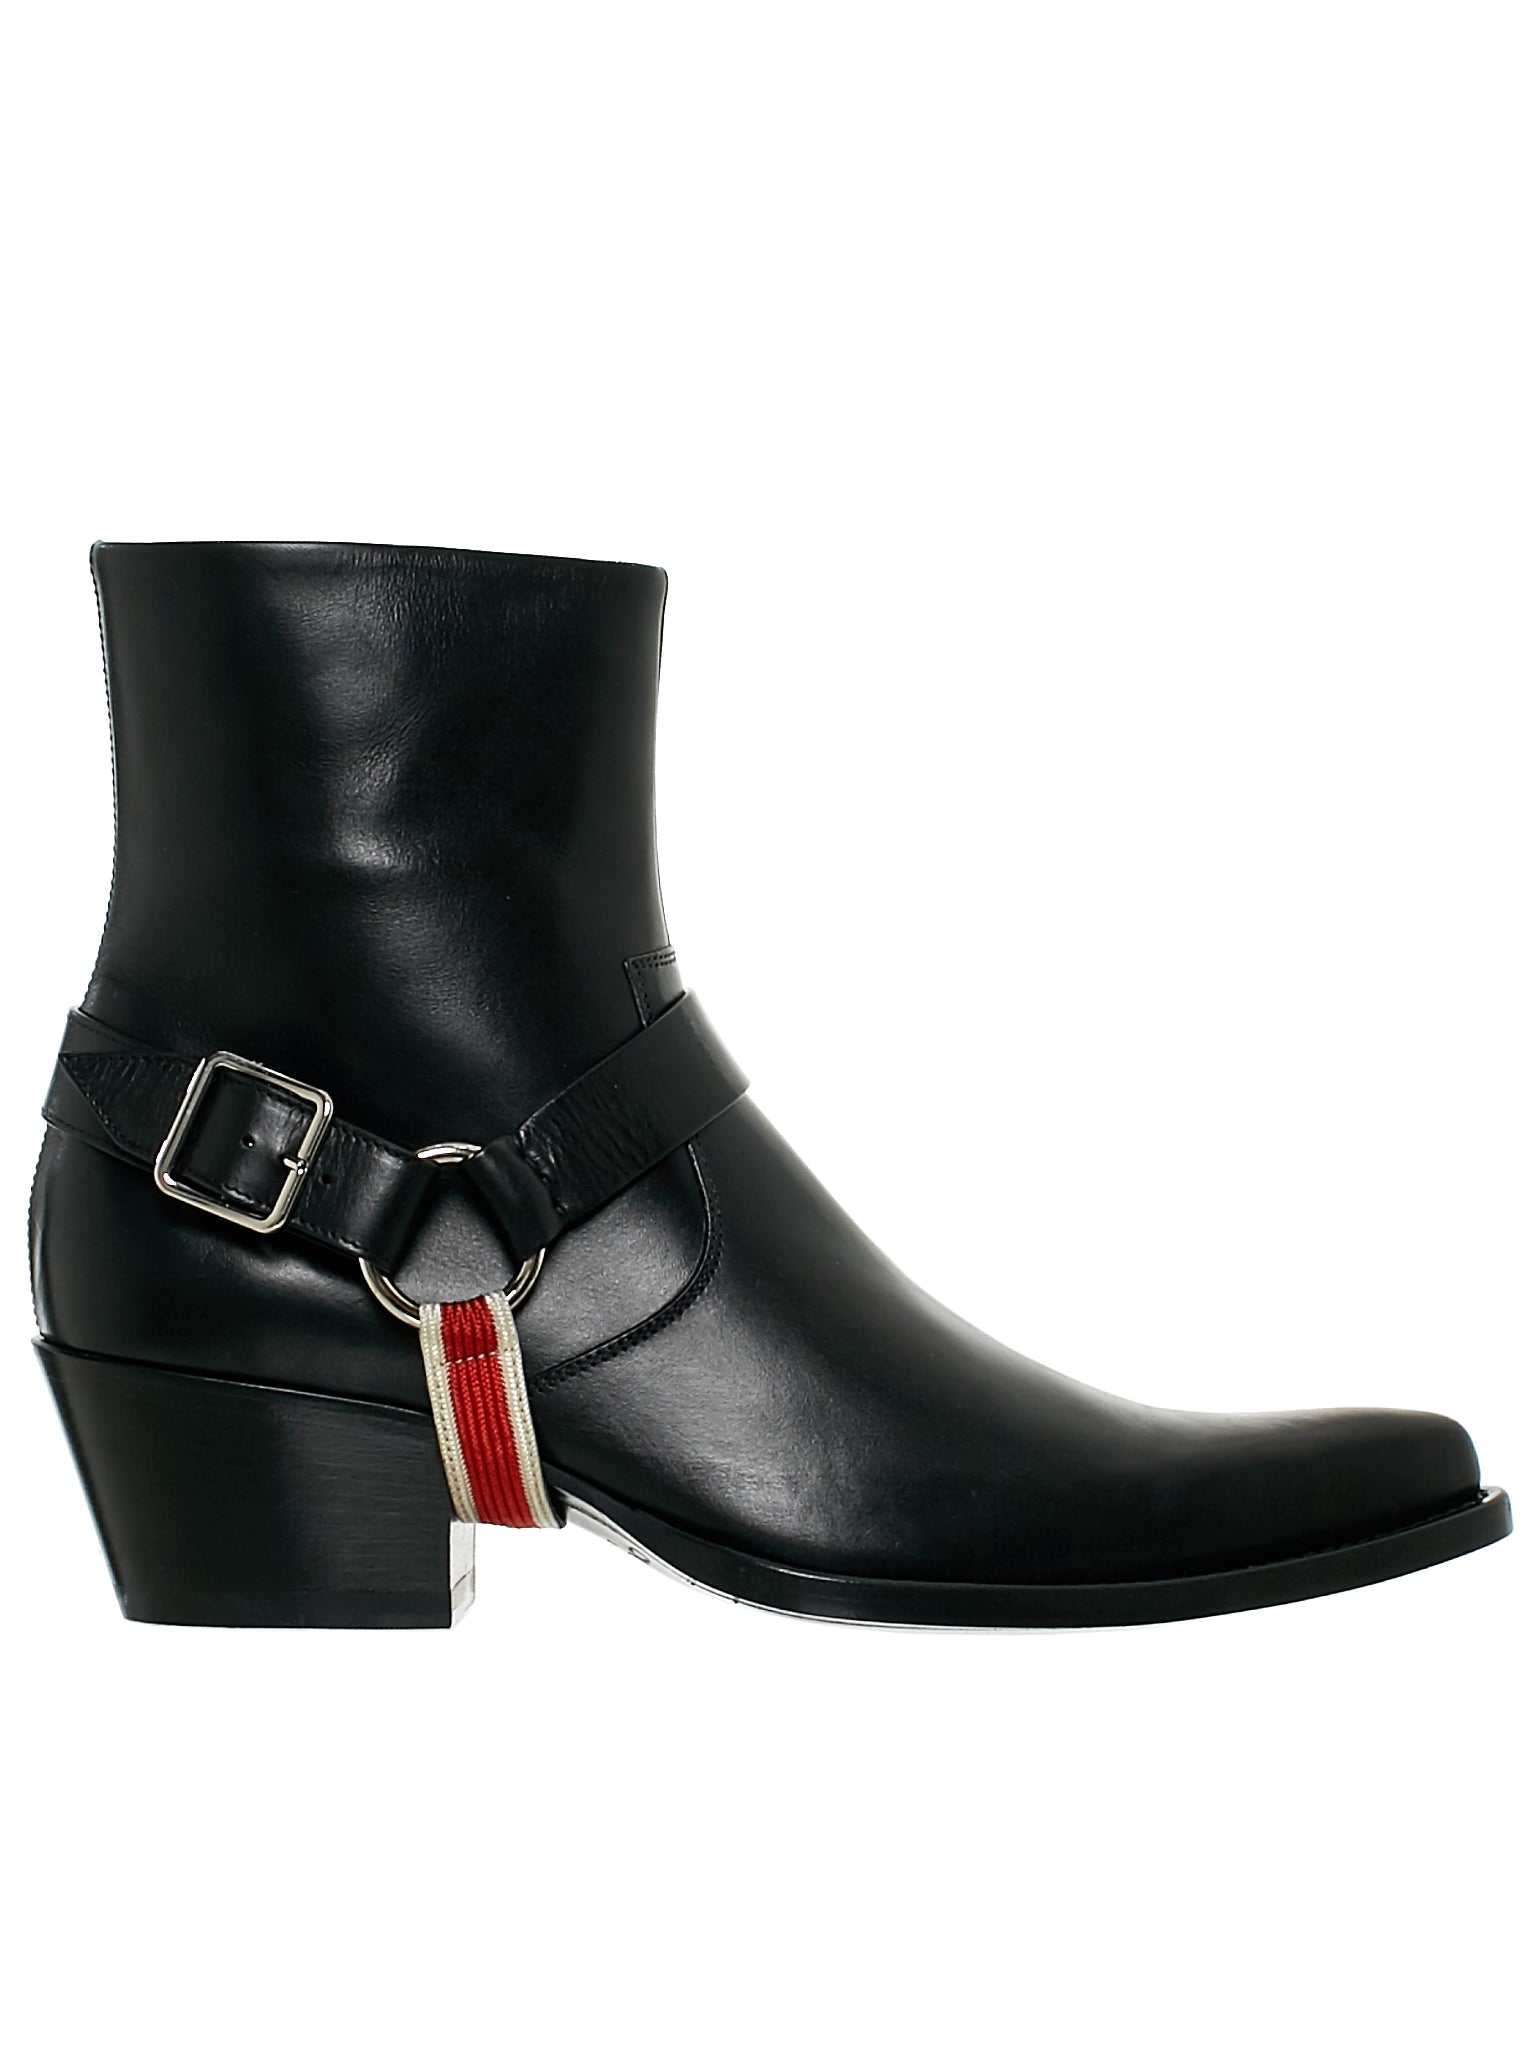 calvin klein 205w39nyc harness boots